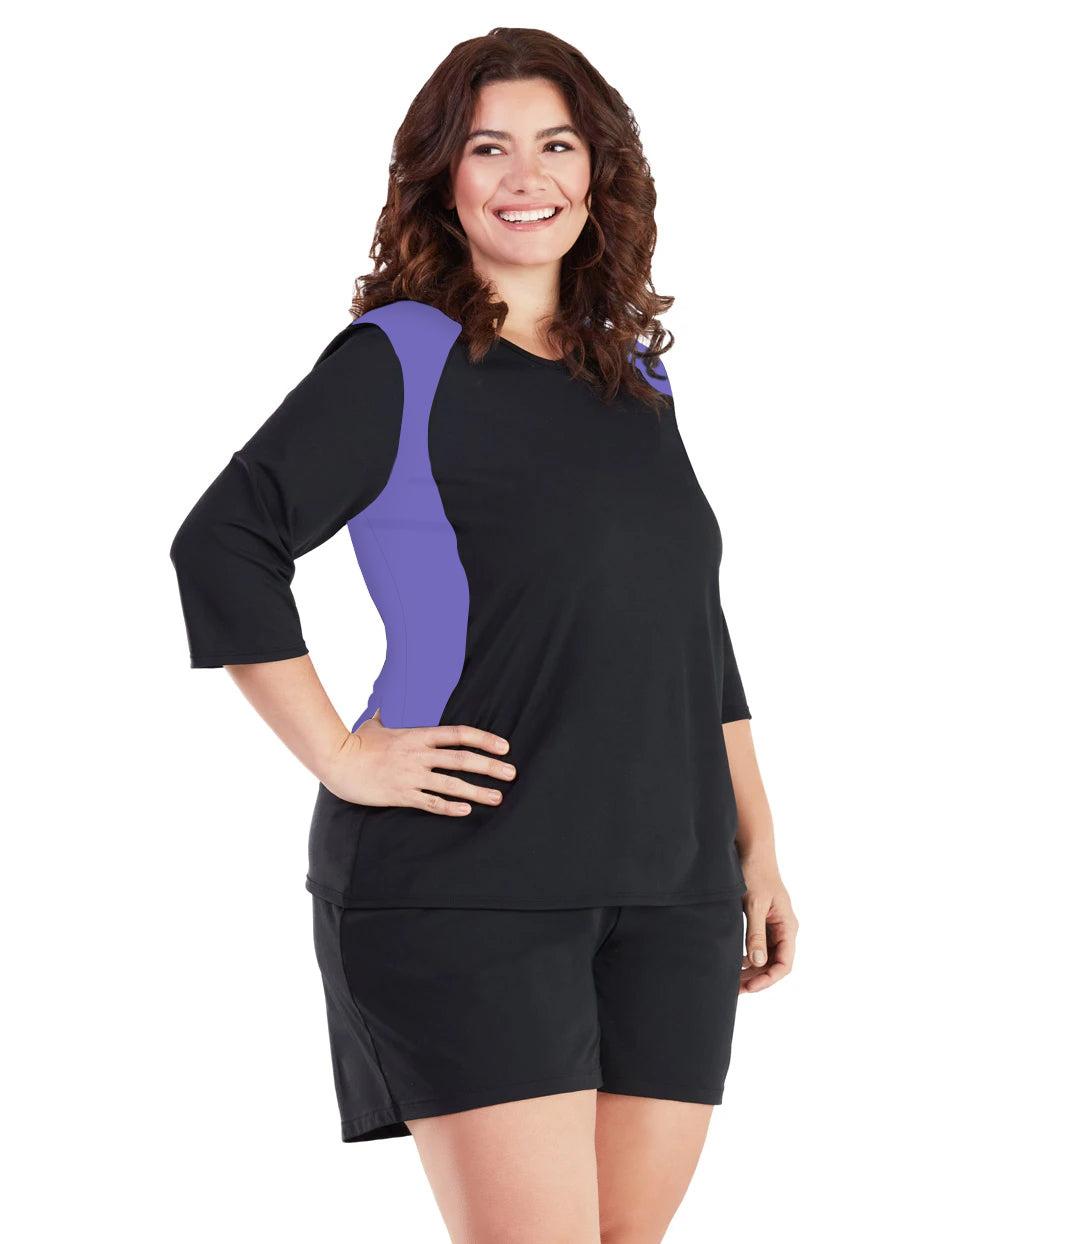 Plus size woman, facing front, wearing AquaSport Three Quarter Sleeve Rash Guard Purple and Black. V-neckline,  black torso and sleeves with purple colorblock at shoulder and waist.   She is wearing a pair of black JunoActive plus size swim shorts. 